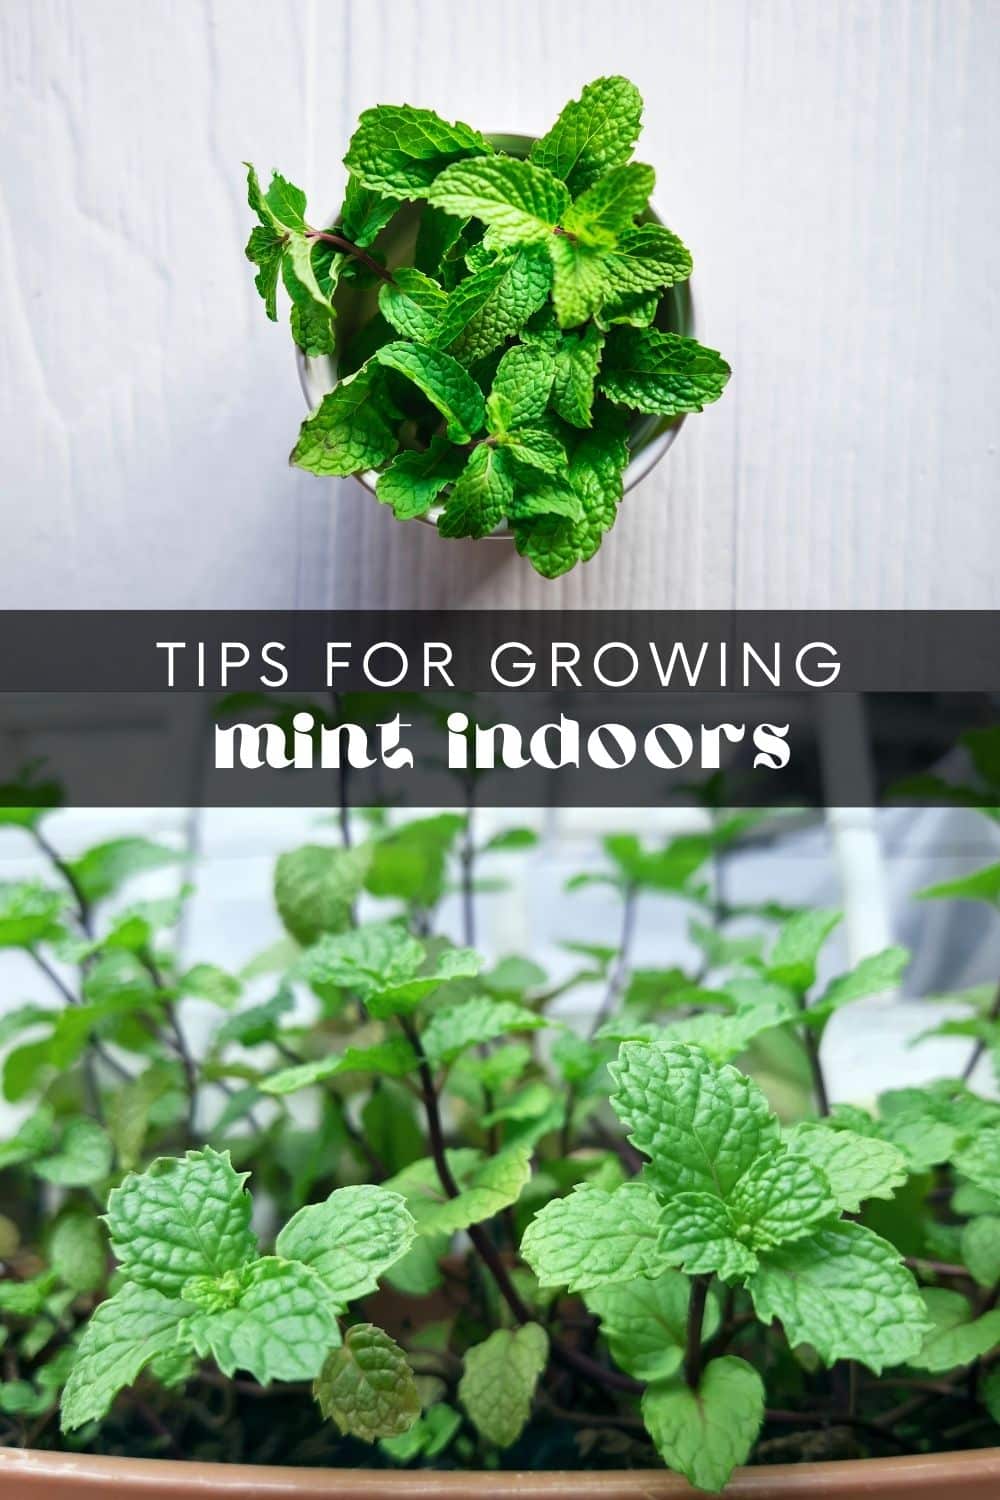 Mint is one of the easiest herbs to grow indoors. It does well in containers and thrives on a sunny windowsill! Growing mint indoors ensures a fresh supply of this fragrant herb year-round – perfect for adding to your cooking, teas, or cocktails.